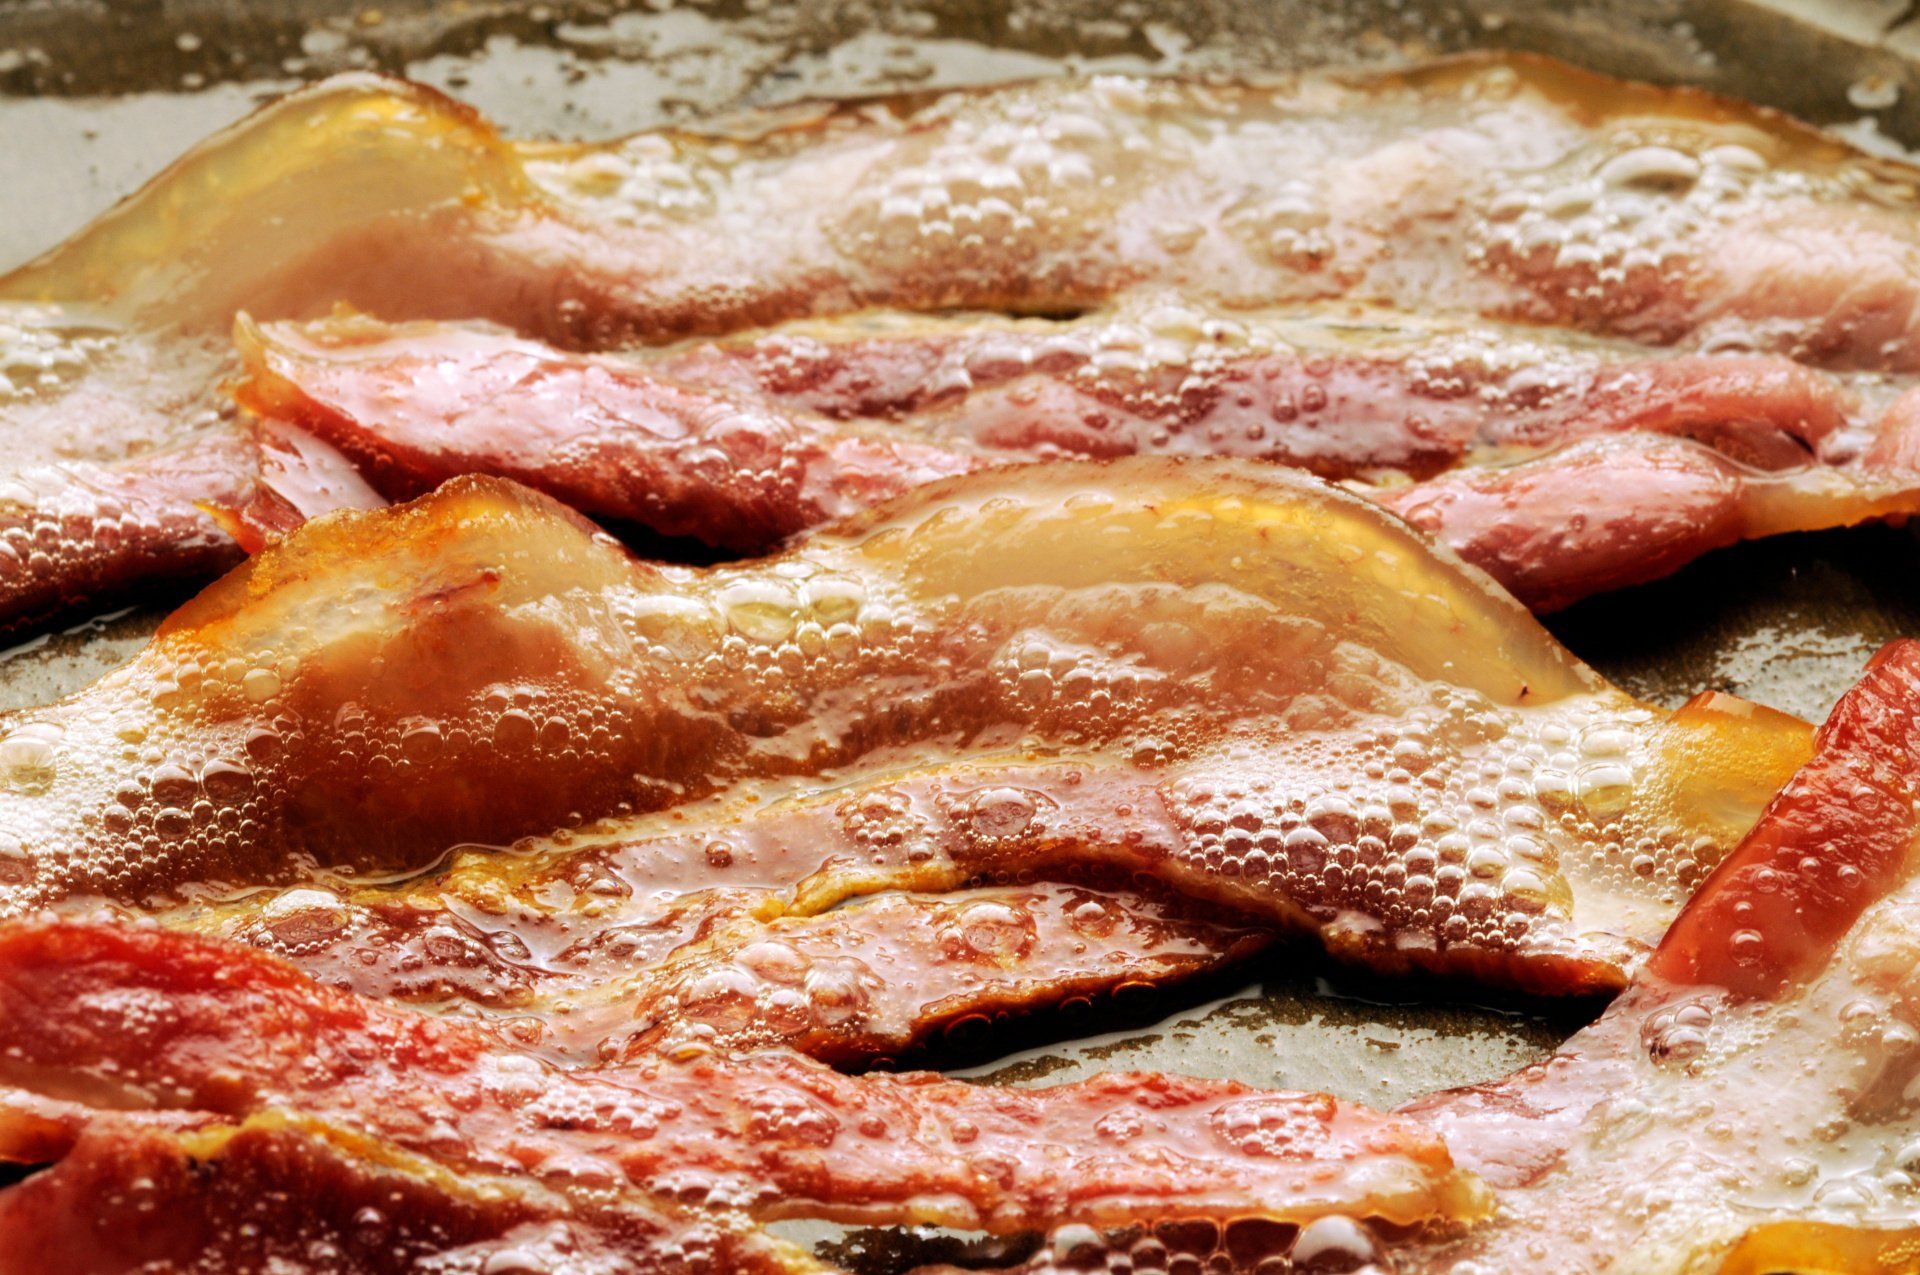 Top uses for leftover bacon grease